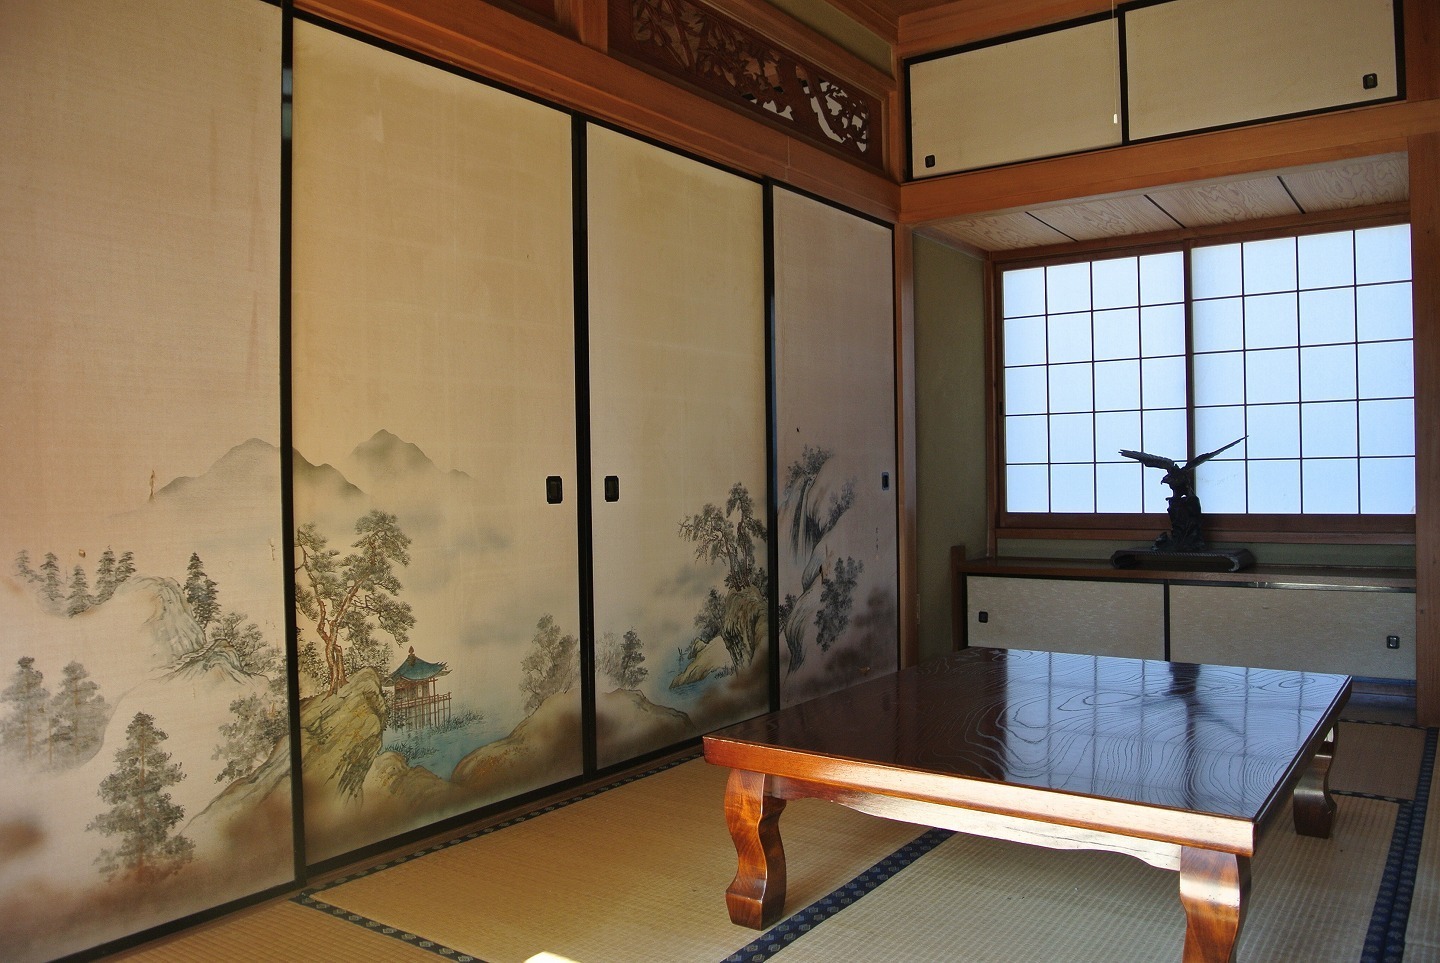 Another Tatami Room